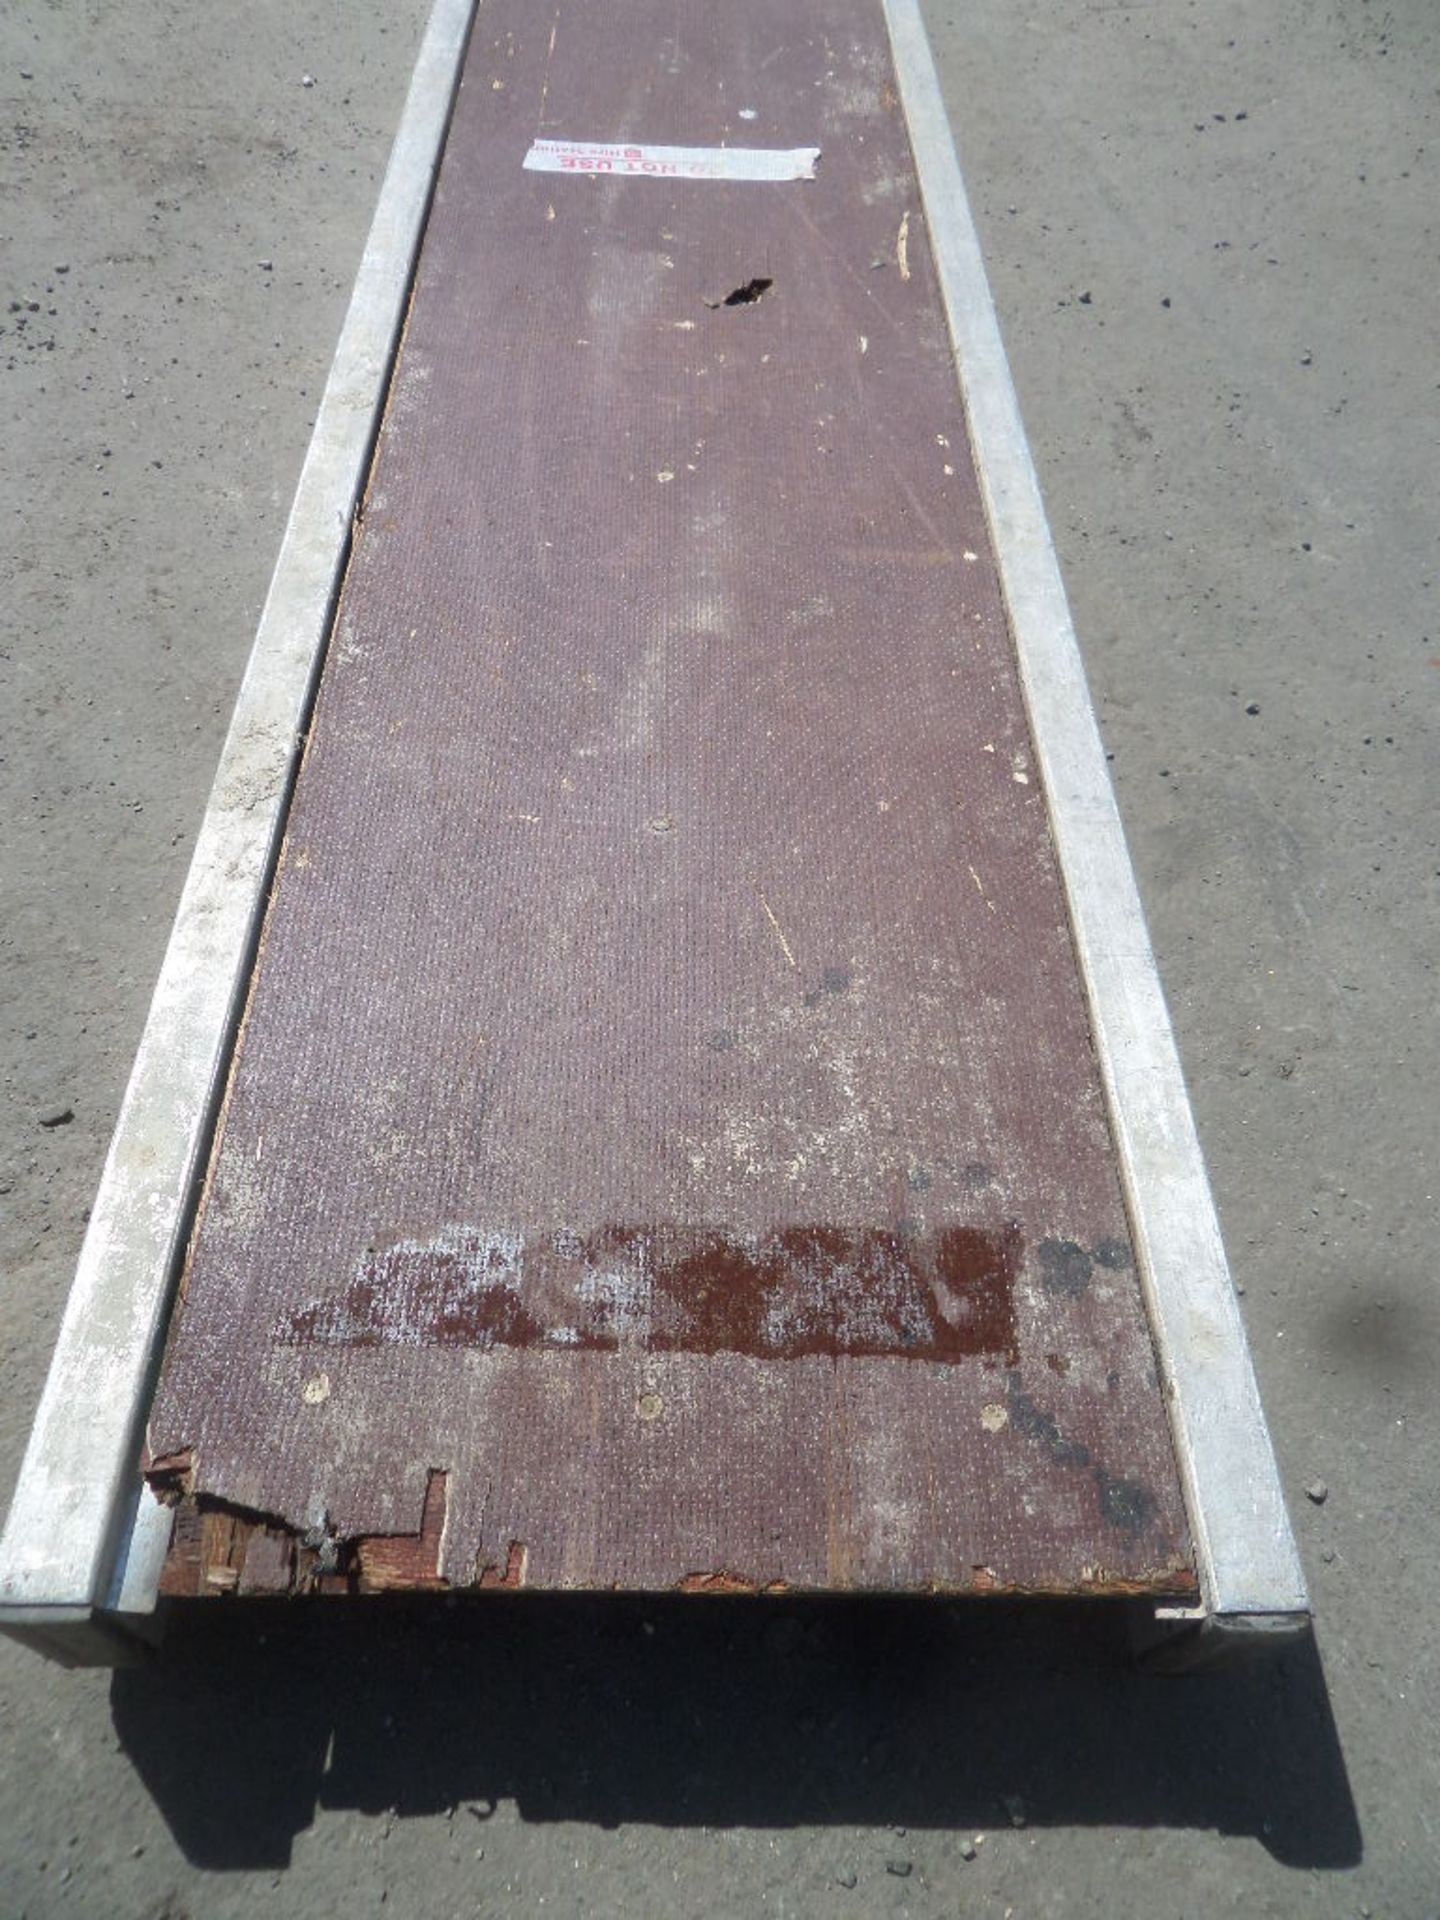 UNKNOWN  {027552} LIGHTWEIGHT ALUMINUM  STAGING 4.8M 450mm wide - Missing half a board please see pi - Image 2 of 3